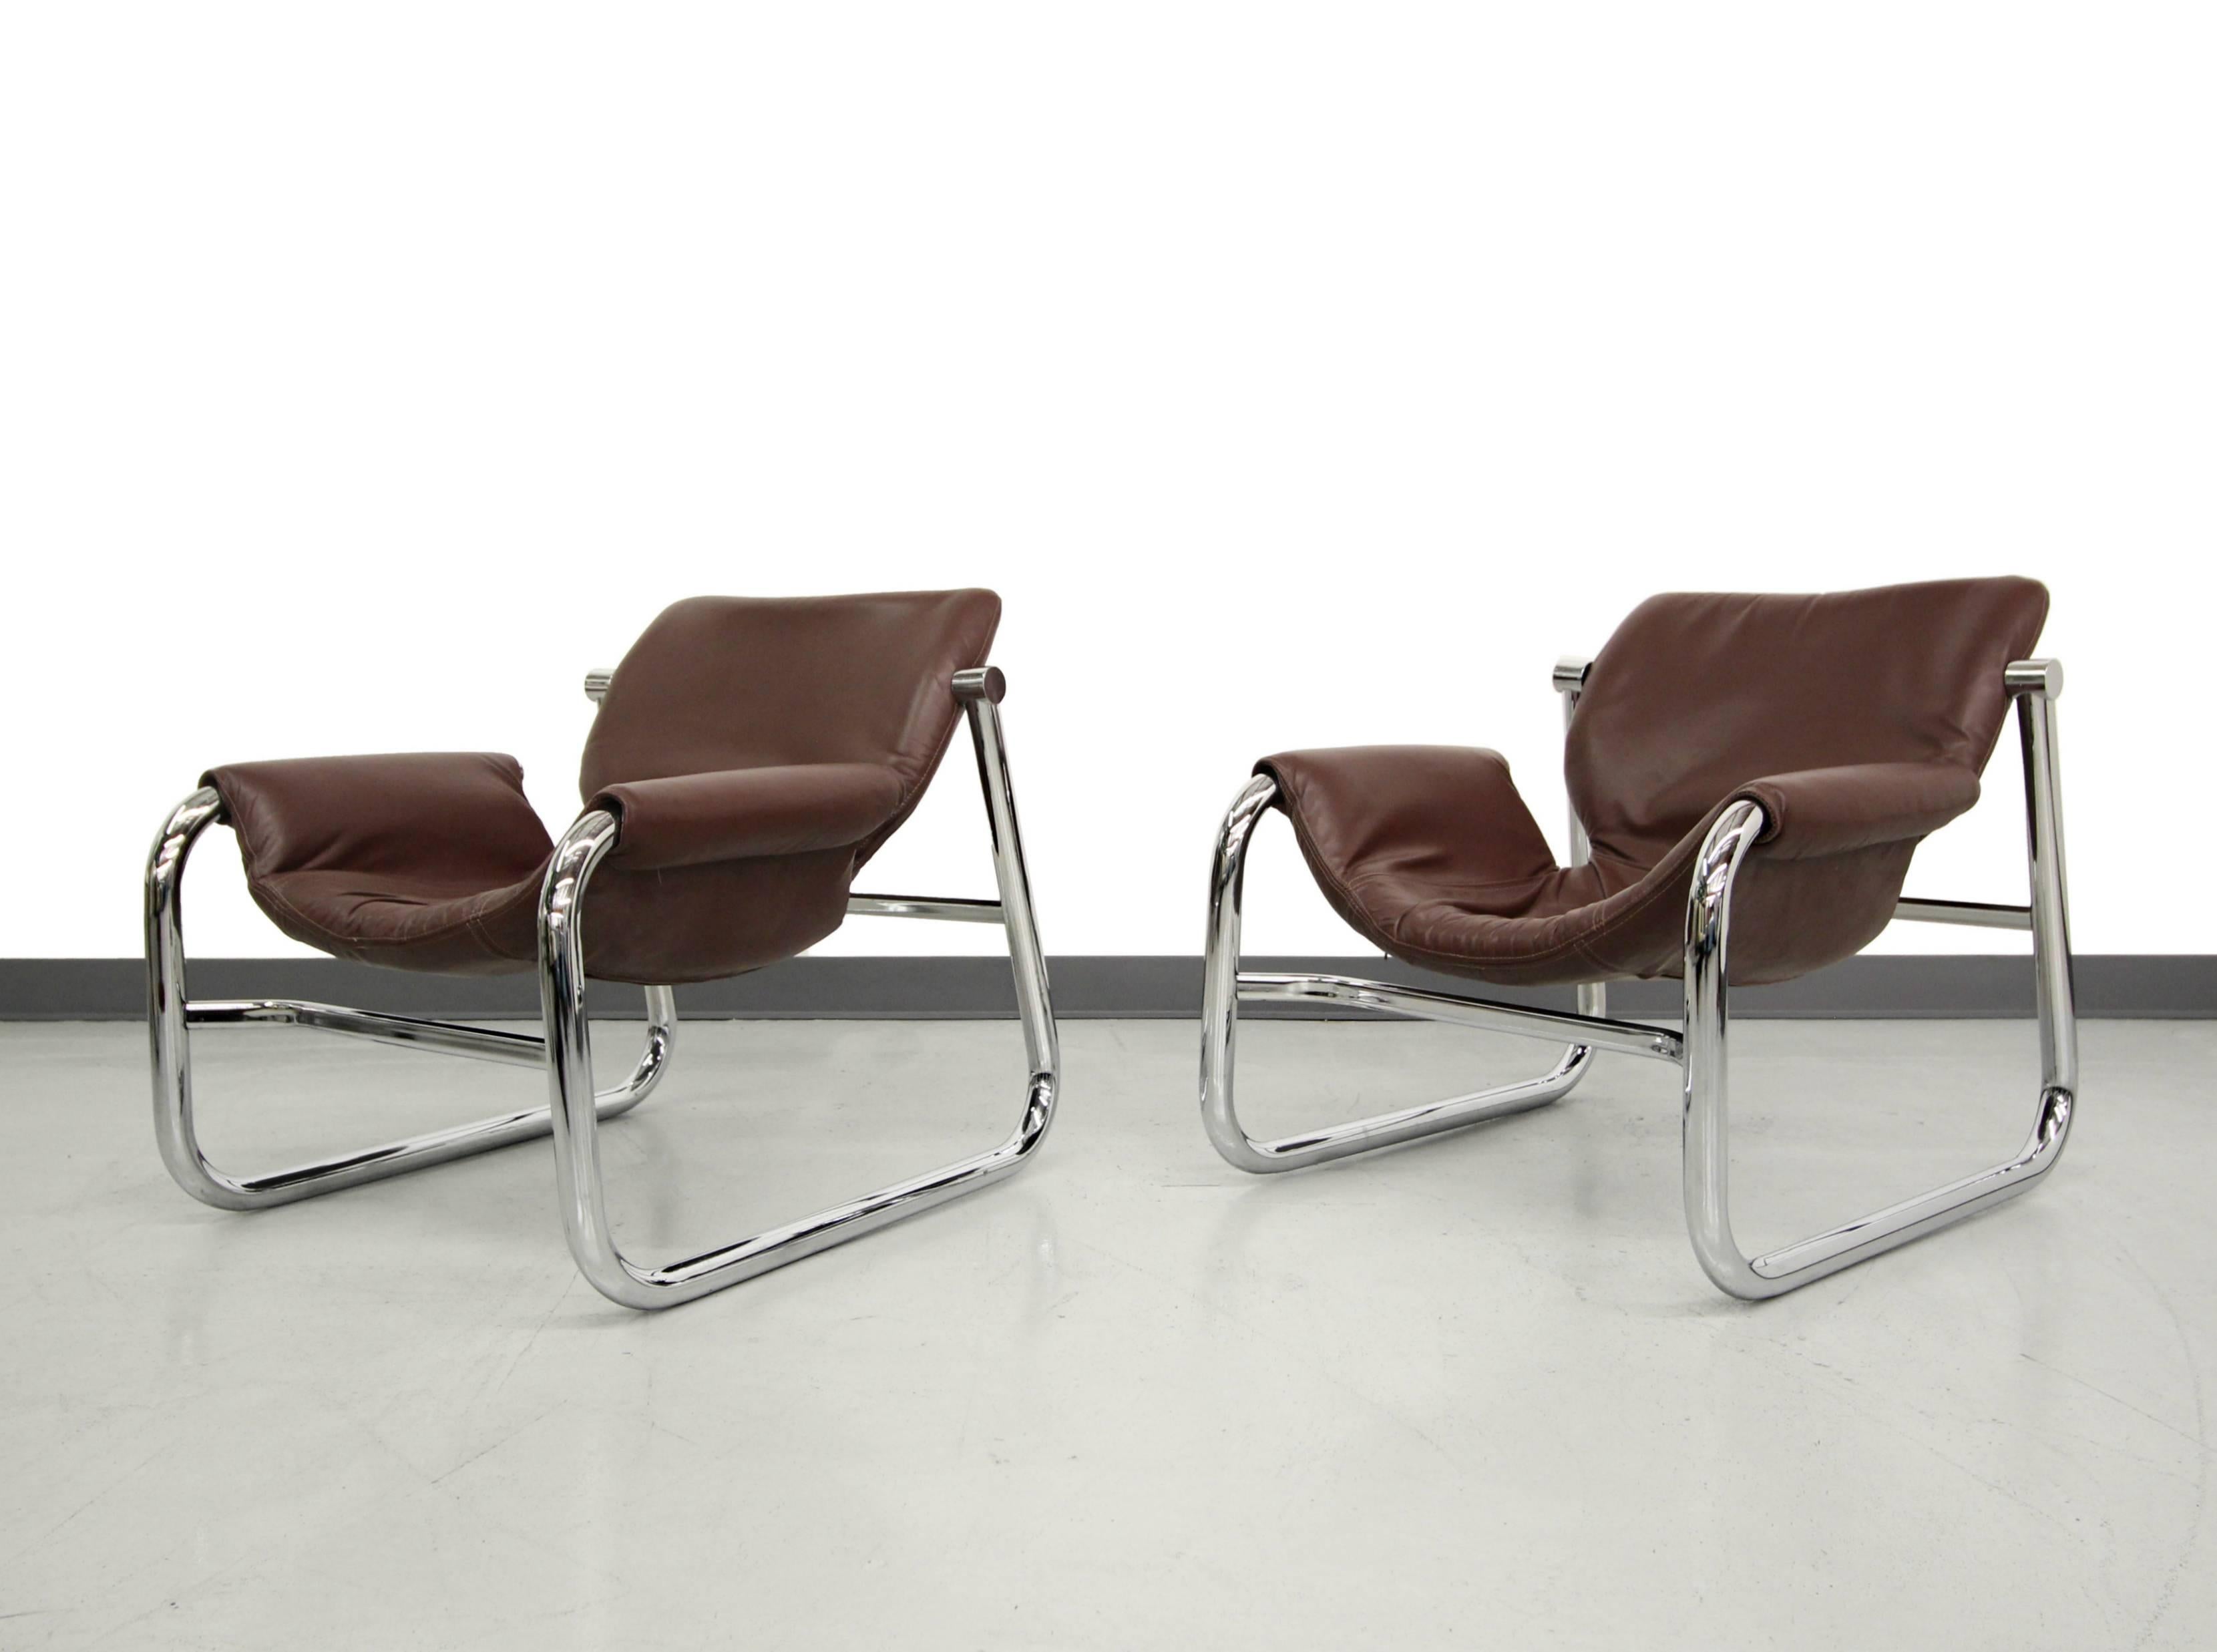 Pair of chrome and leather Alpha lounge chairs by Maurice Burke, for Pozza Brazil. Chairs are comprised of a maroon leather sling on a mirrored chrome frame. Relaxed profile and stylish.